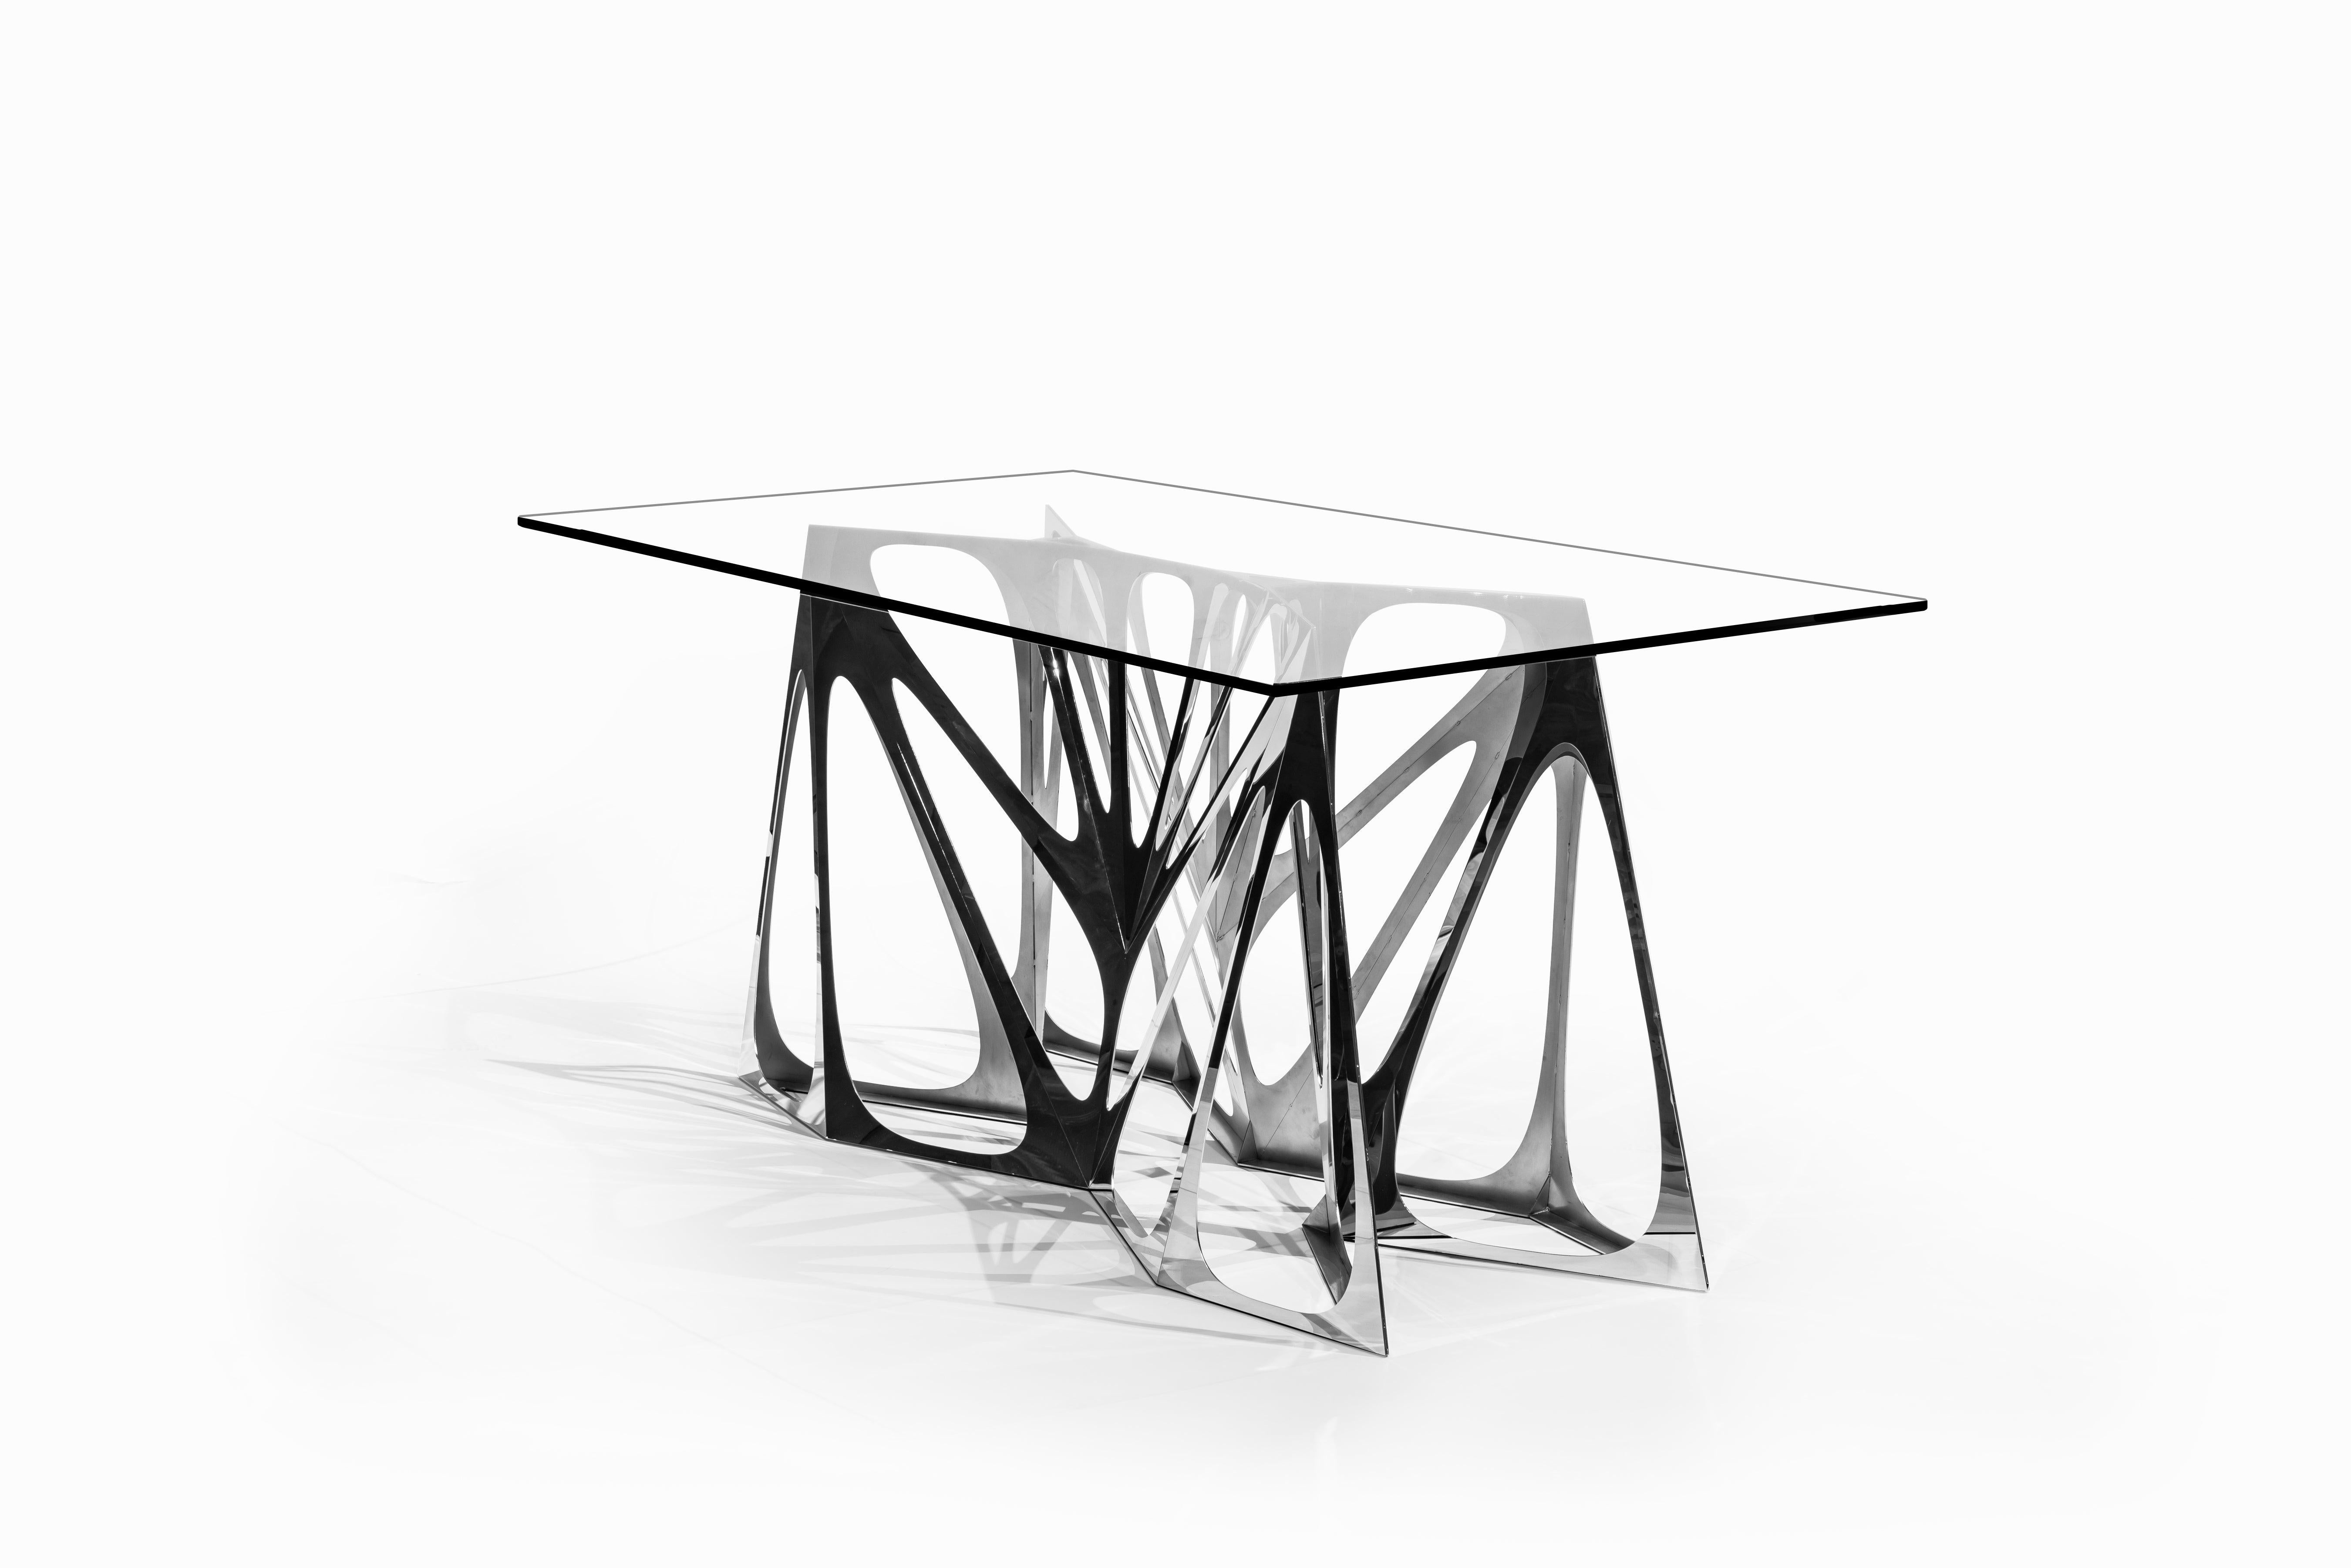 Chinese Object #MT-S4-F Mirror Polished Stainless Steel Table by Zhoujie Zhang For Sale